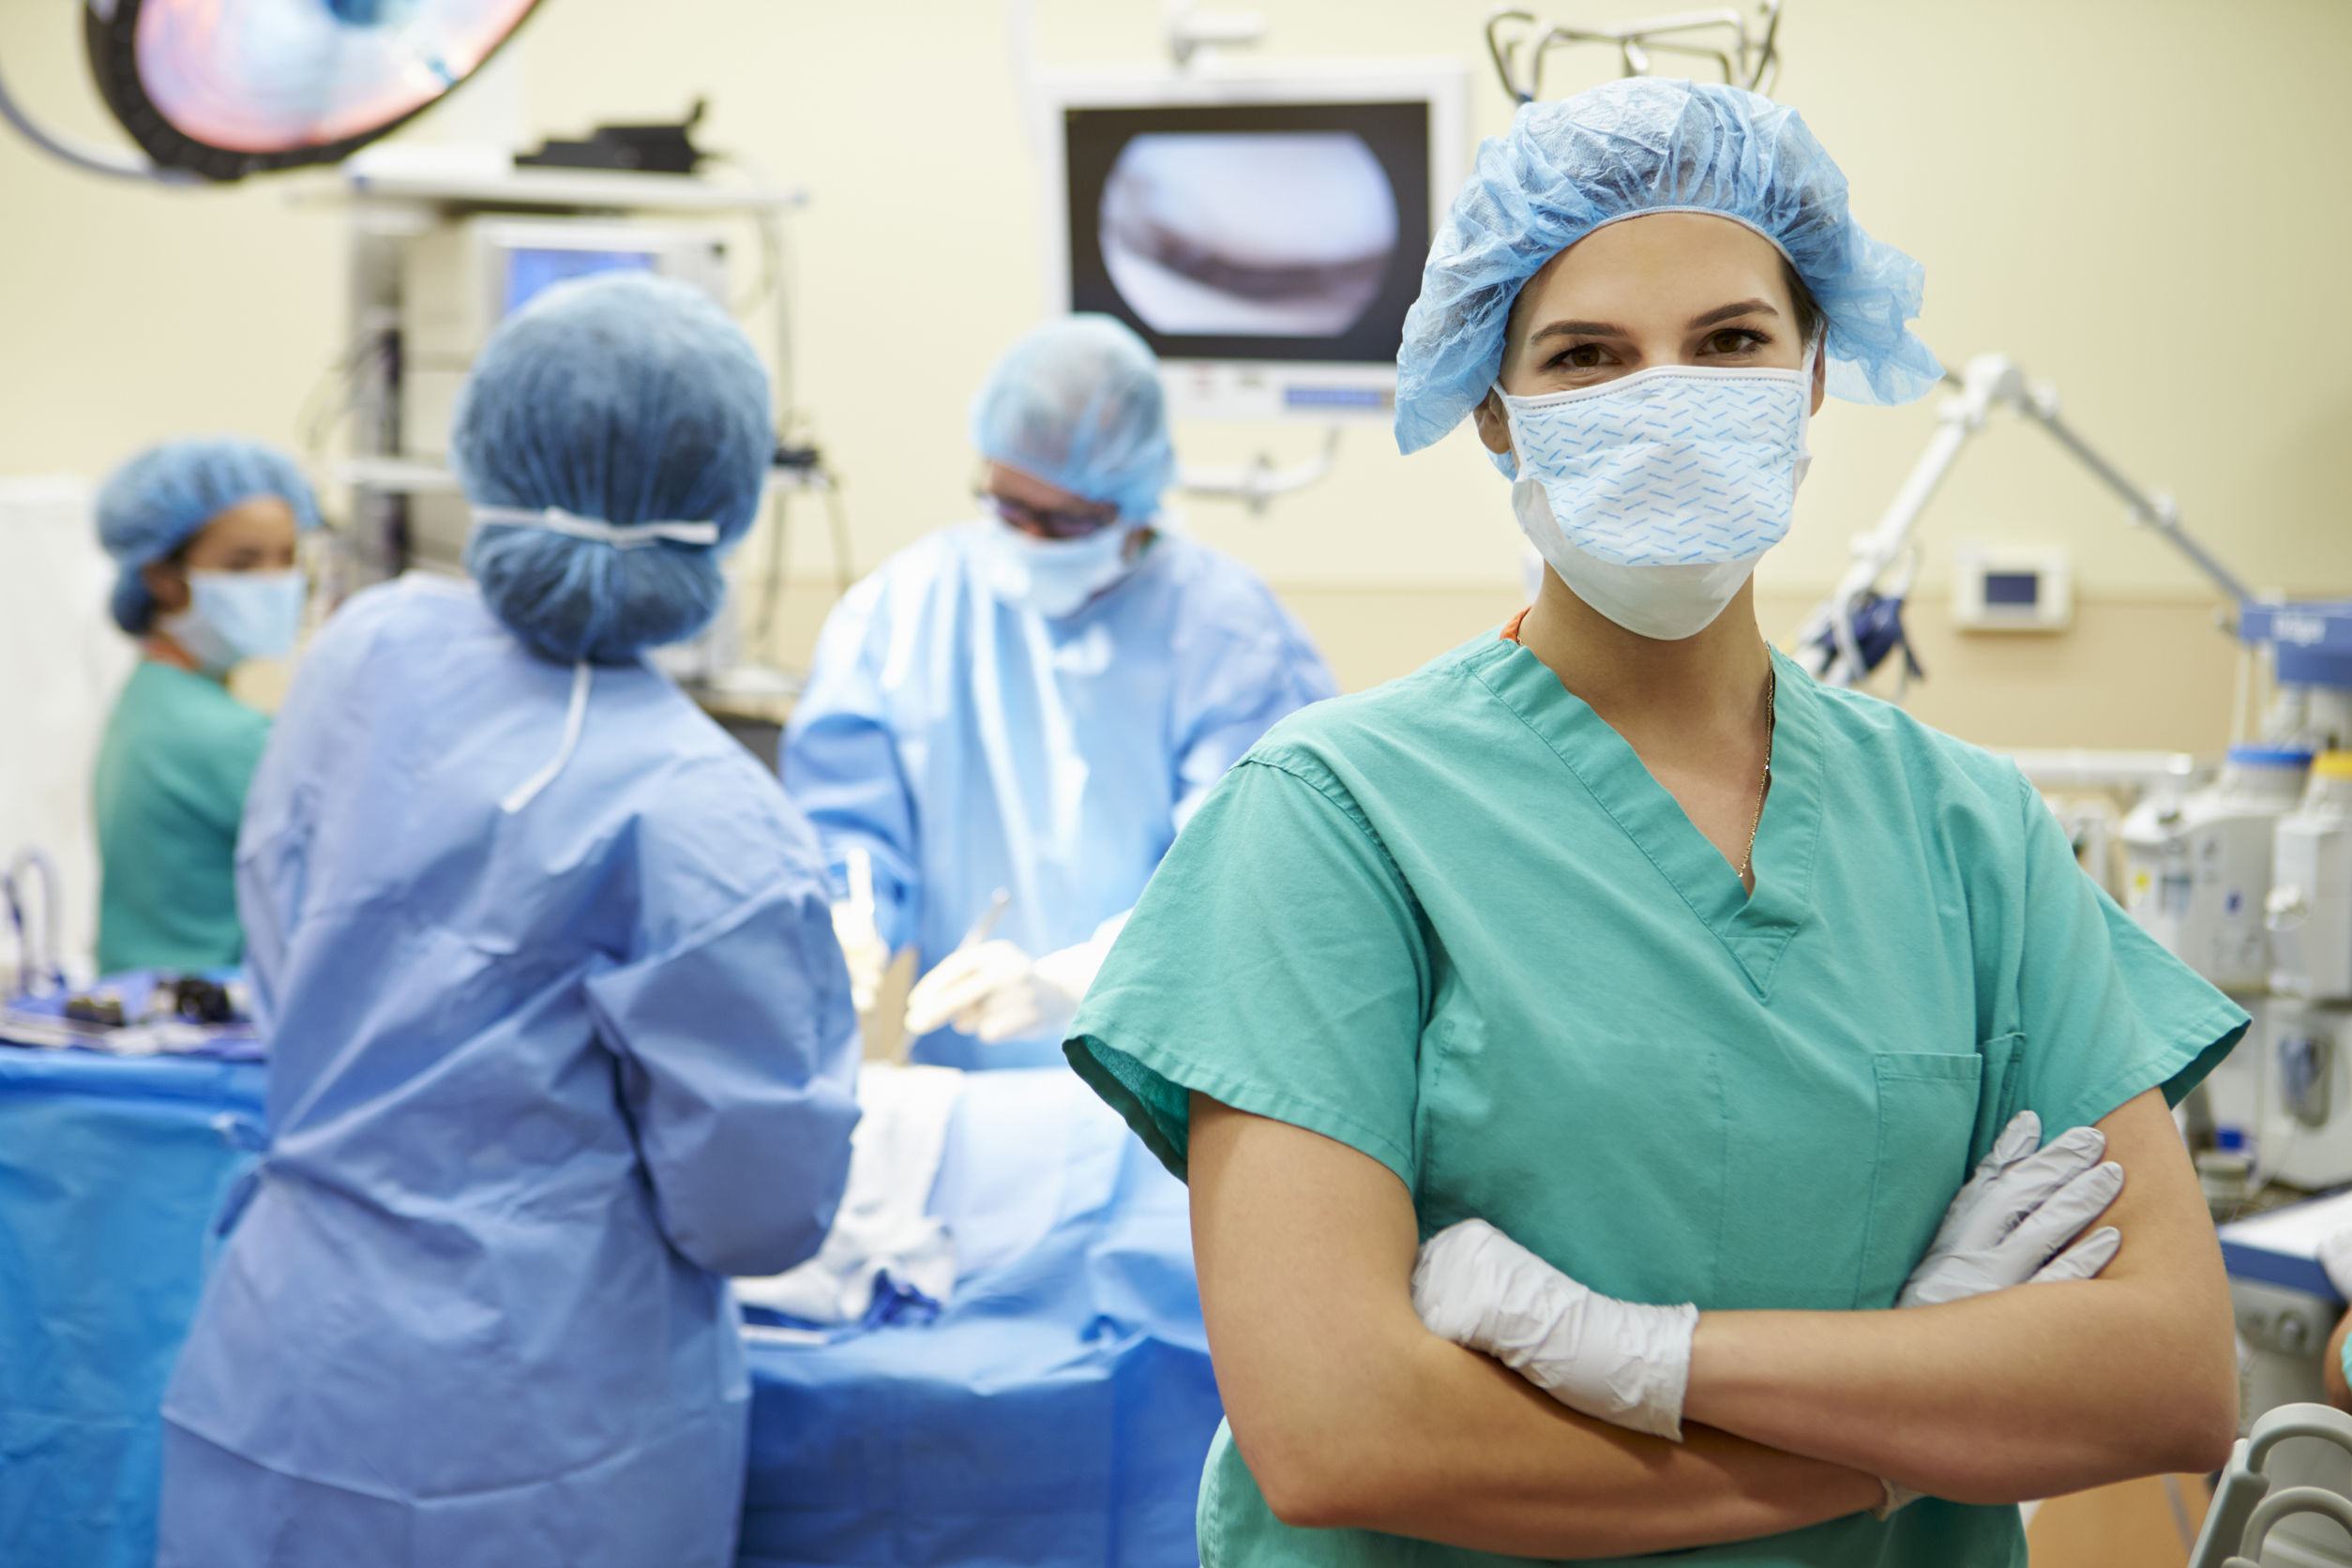 Nurse in operating room surrounded by doctors, arms folded